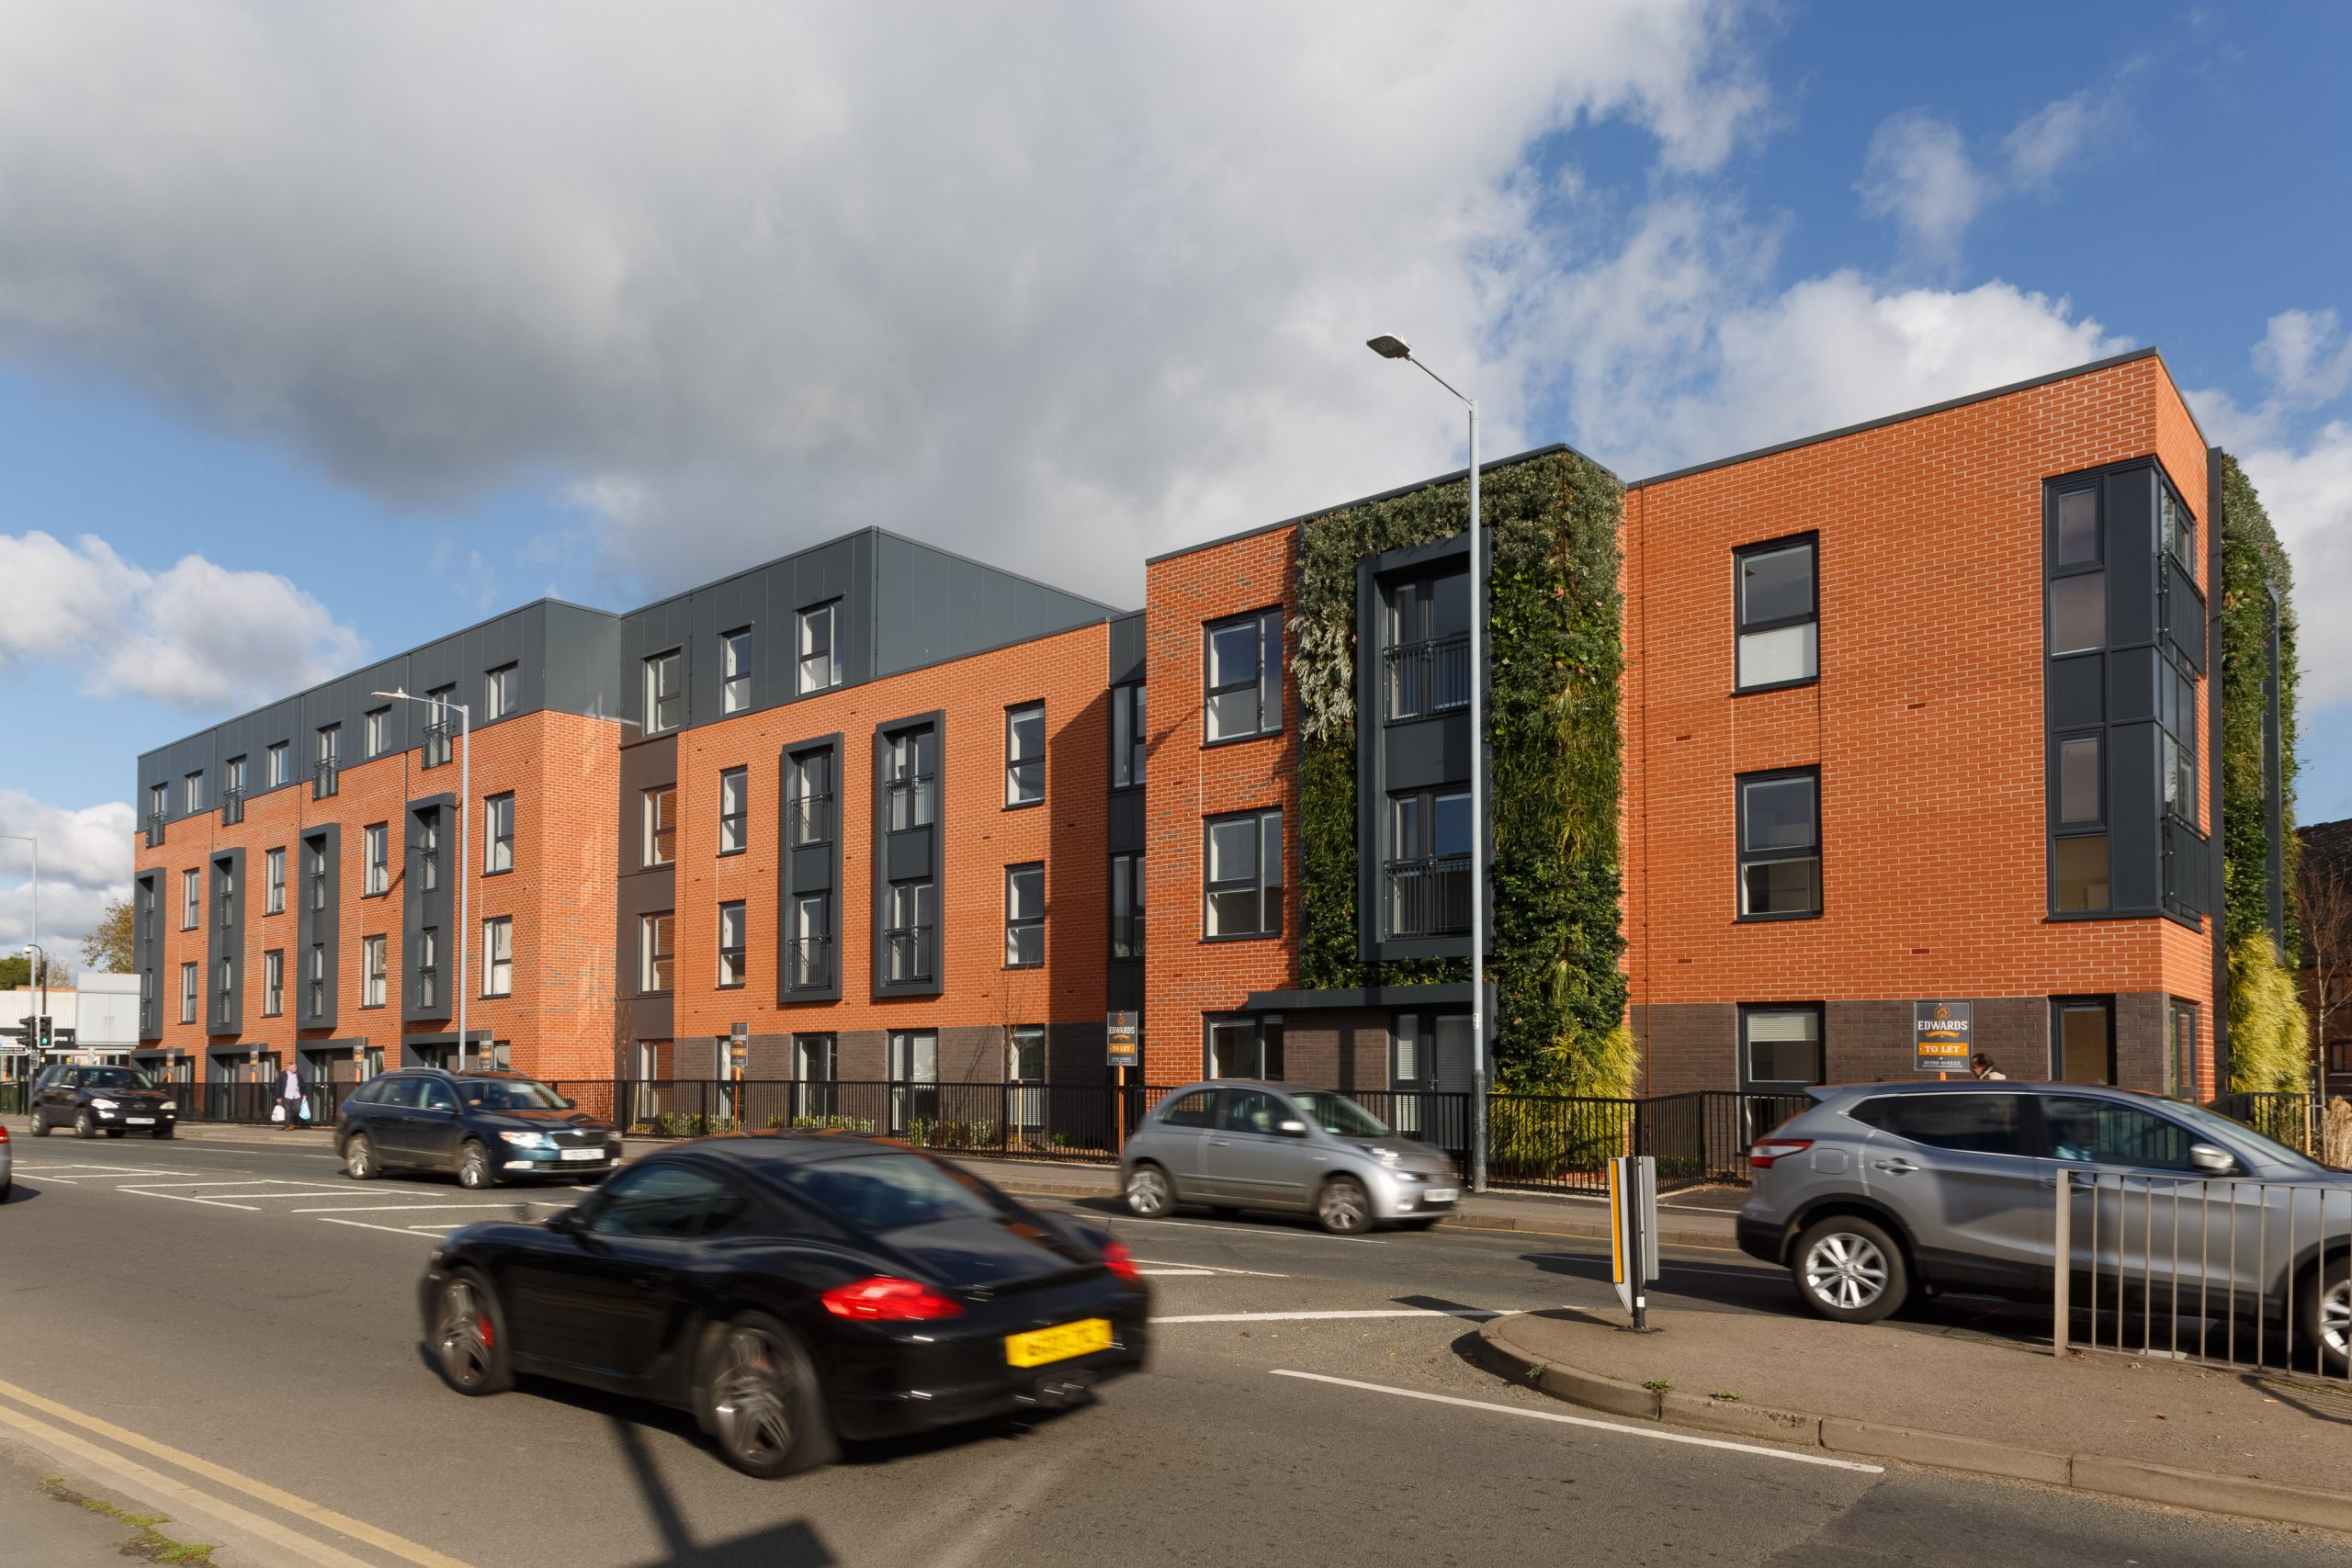 Modus system used in Orbit Housing’s Fordham House @eurocellplc